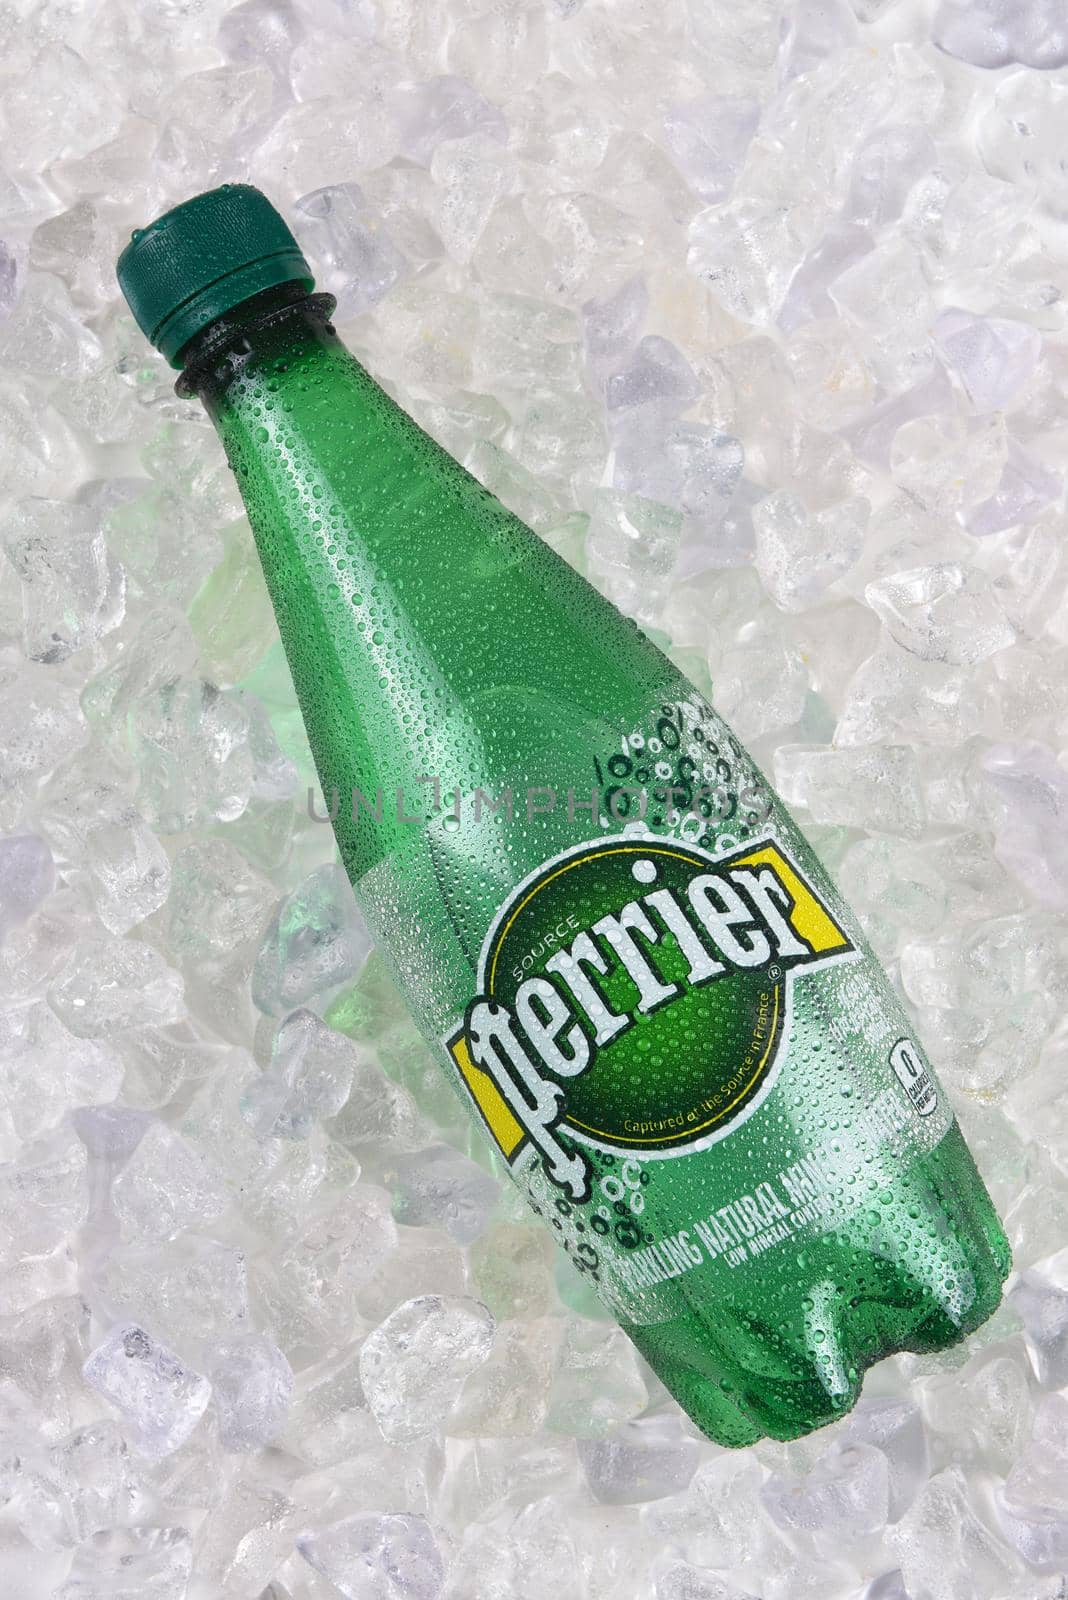 IRVINE, CALIFORNIA - DECEMBER 17, 2017: Perrier Sparkling Mineral Water on ice. The spring, in Vergeze, France, where the water is sourced is naturally carbonated.